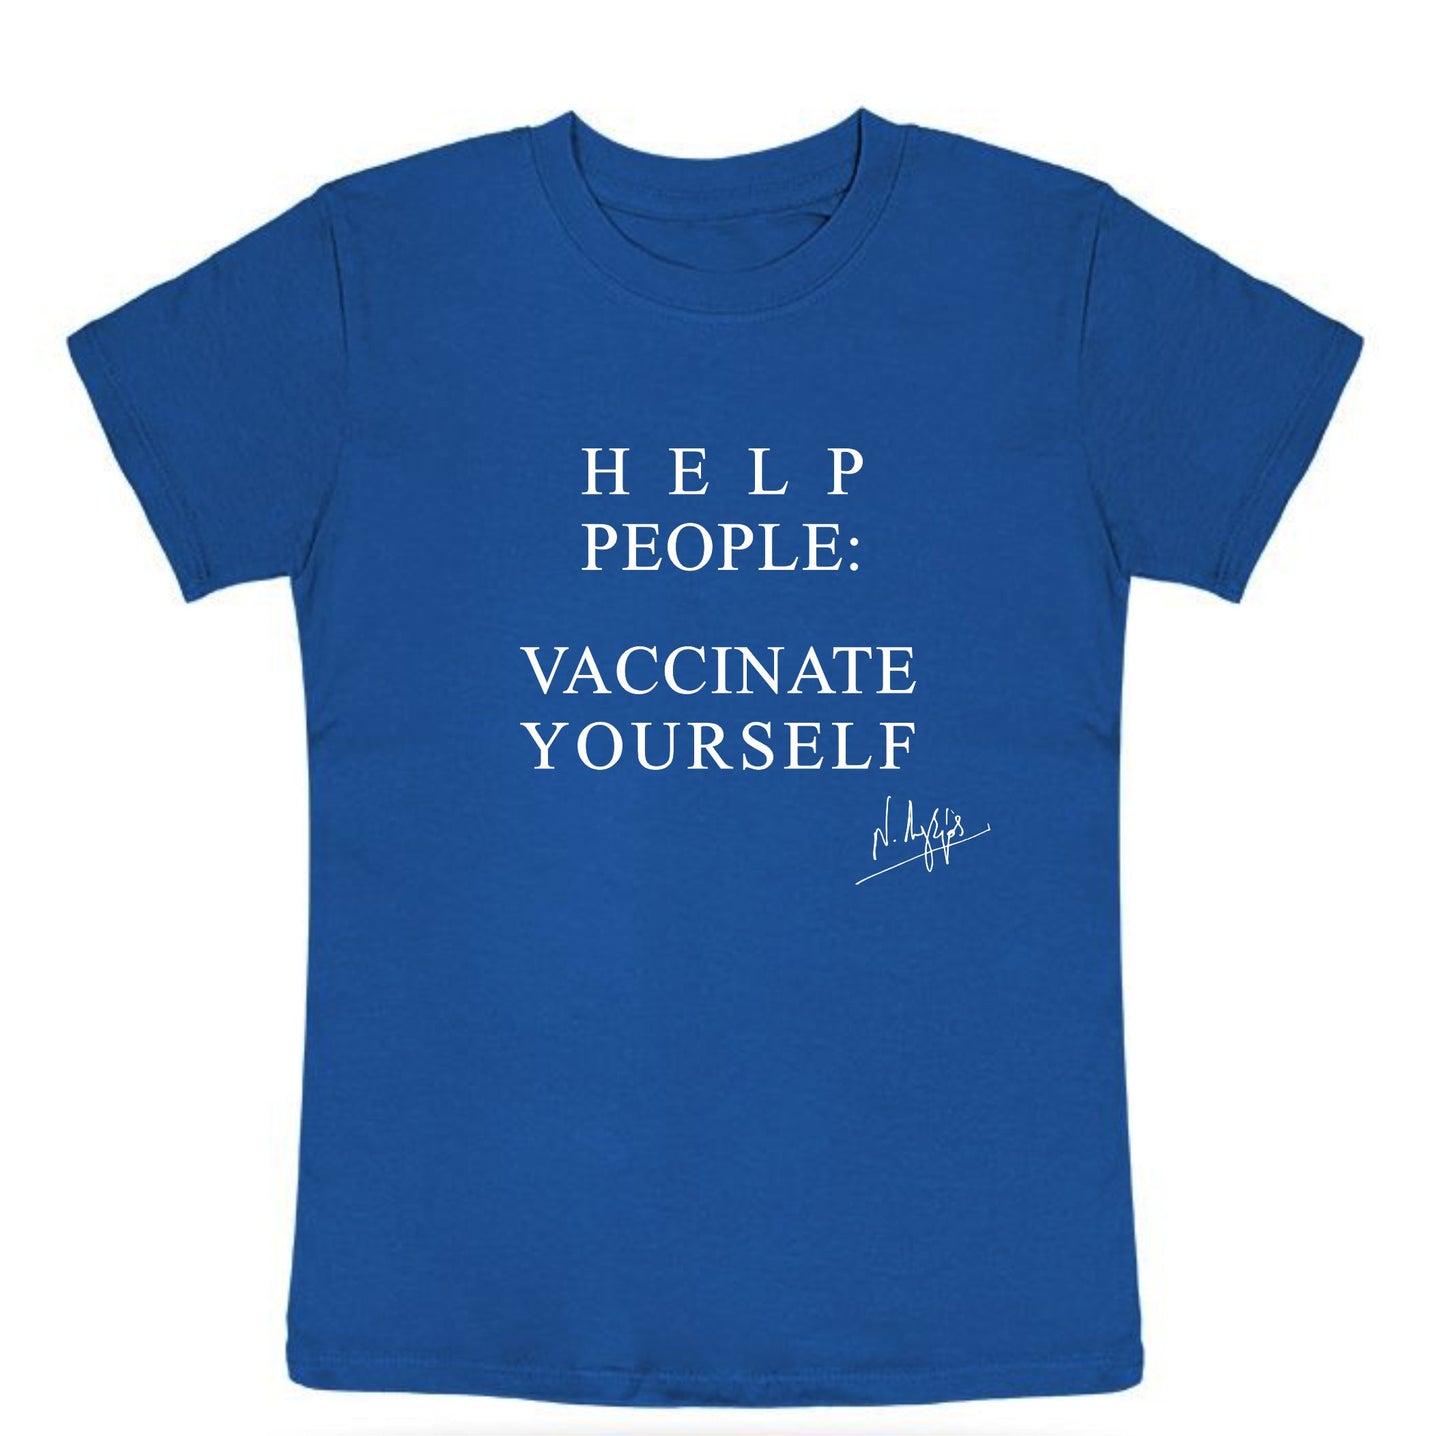 Help people: vaccinate yourself